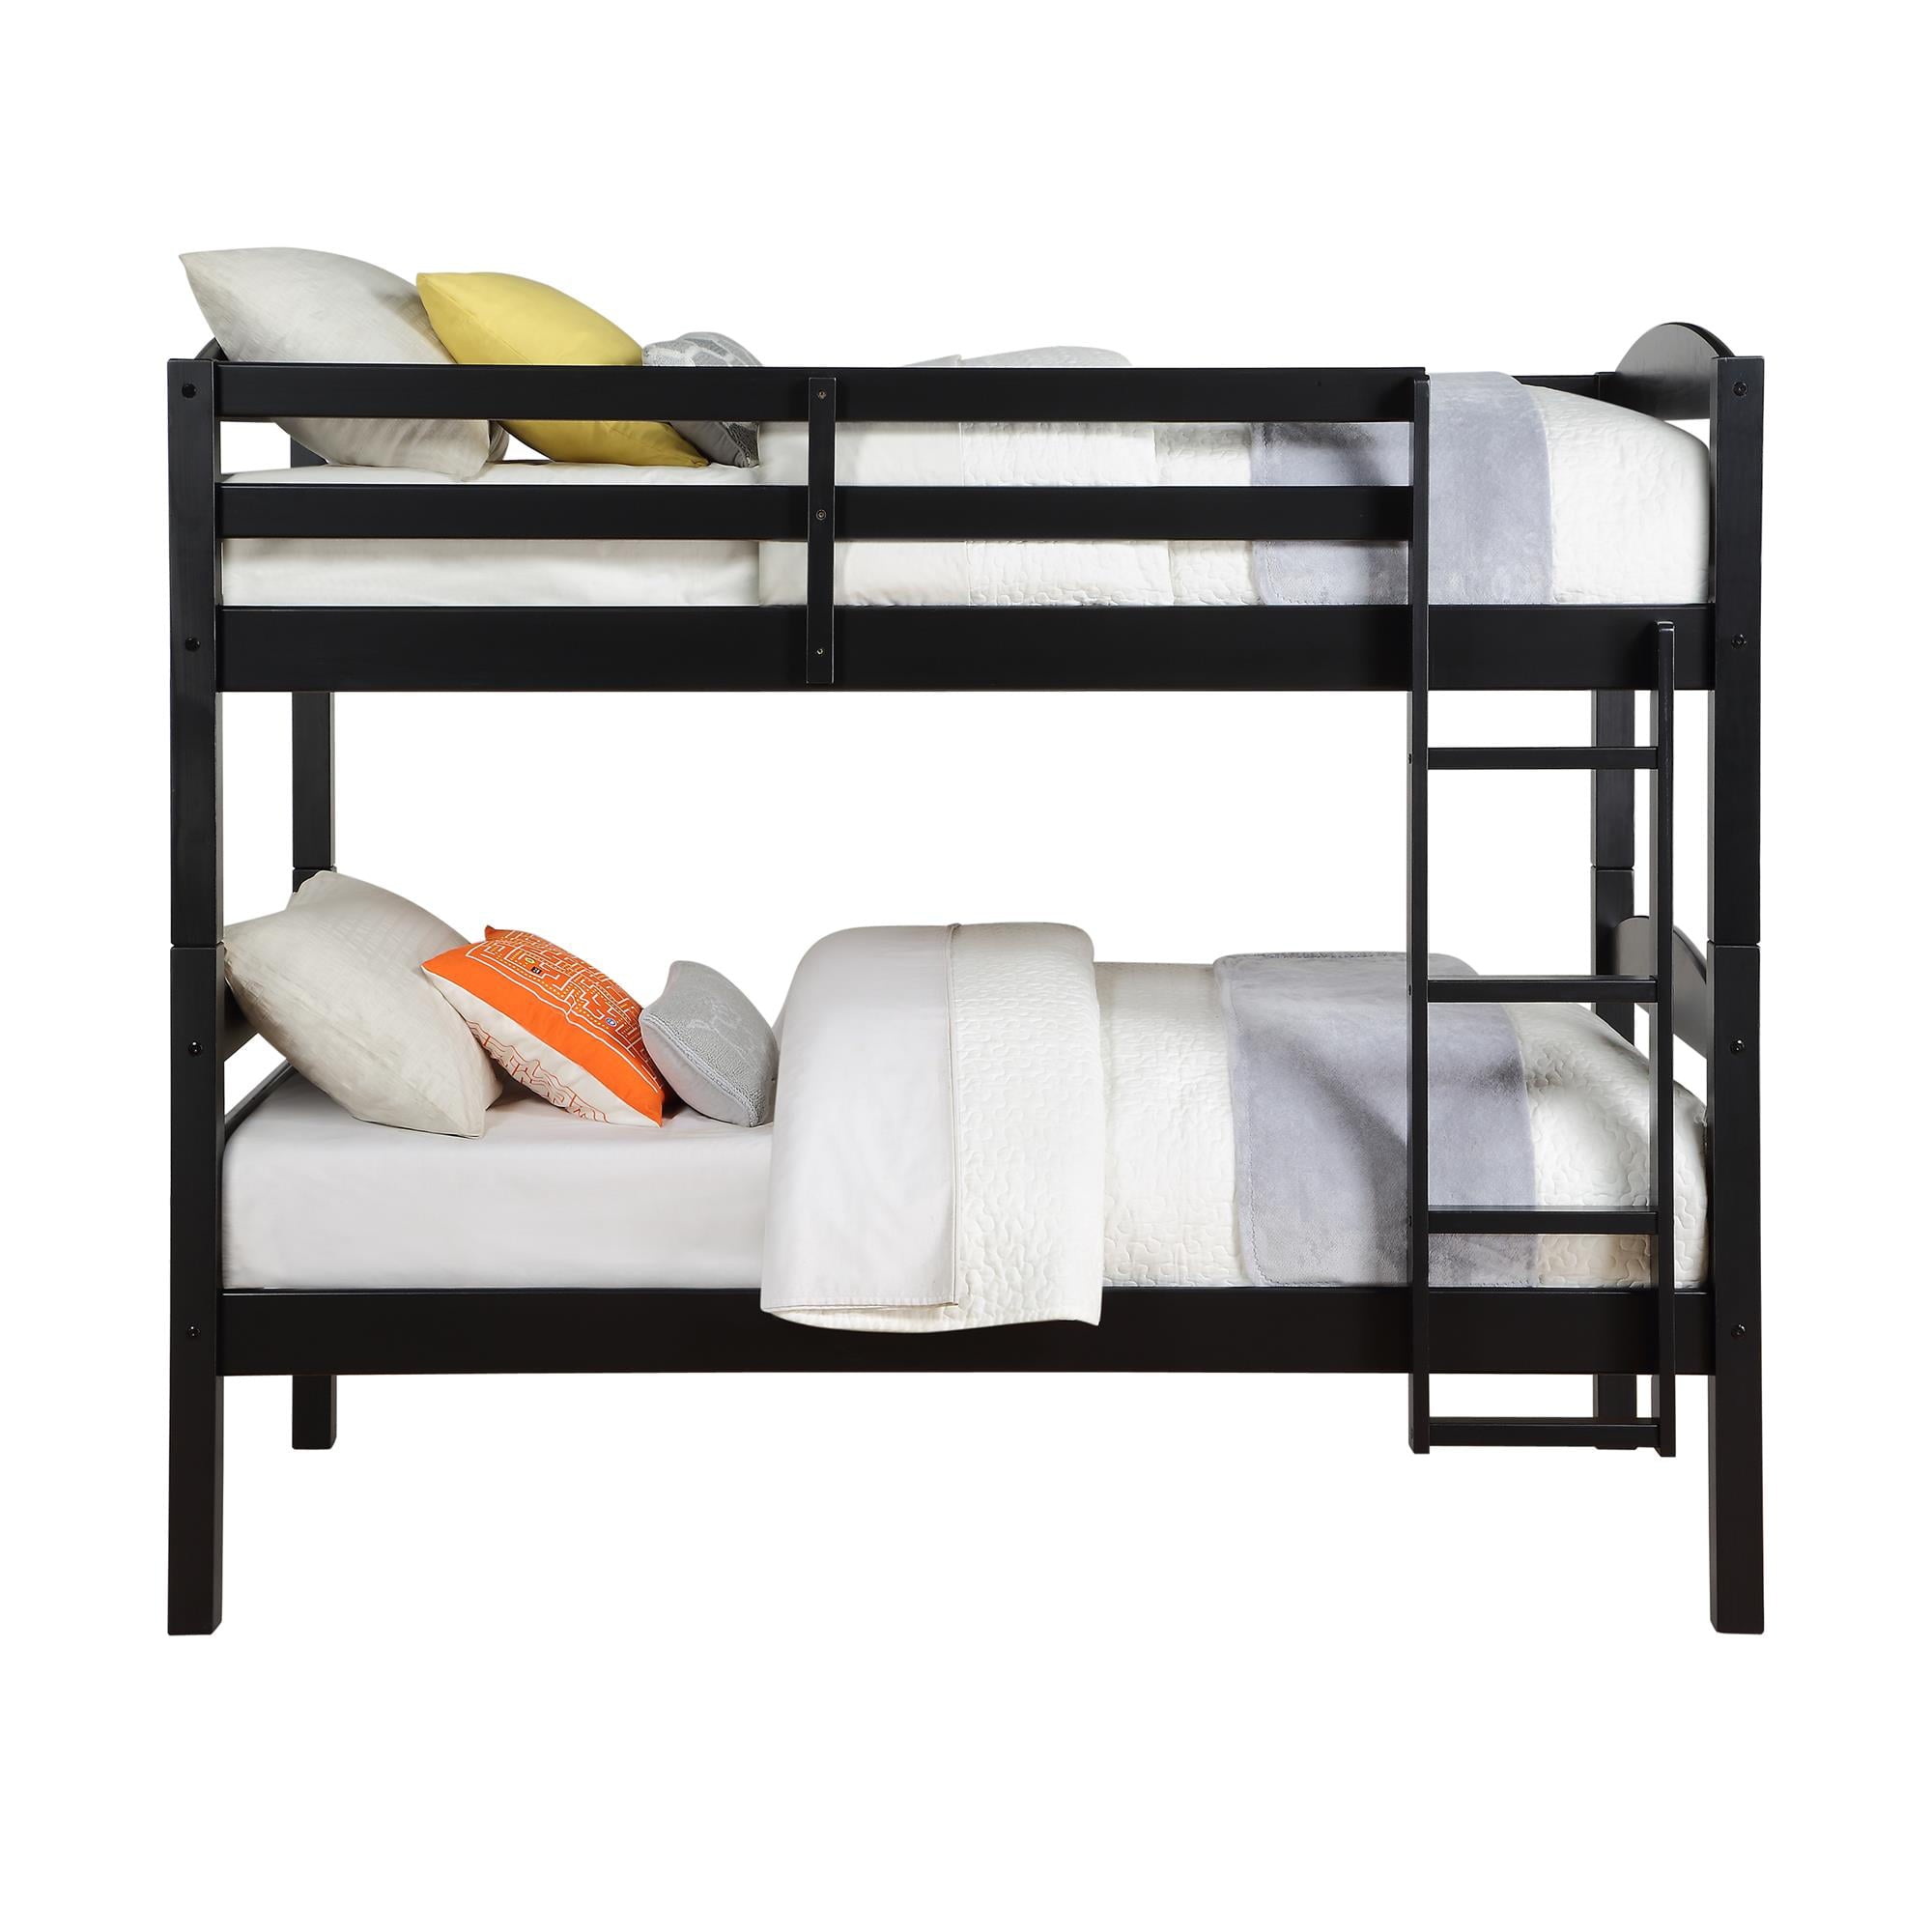 Better Homes and Gardens Leighton Kids Twin over Twin Wood Bunk Bed, Black